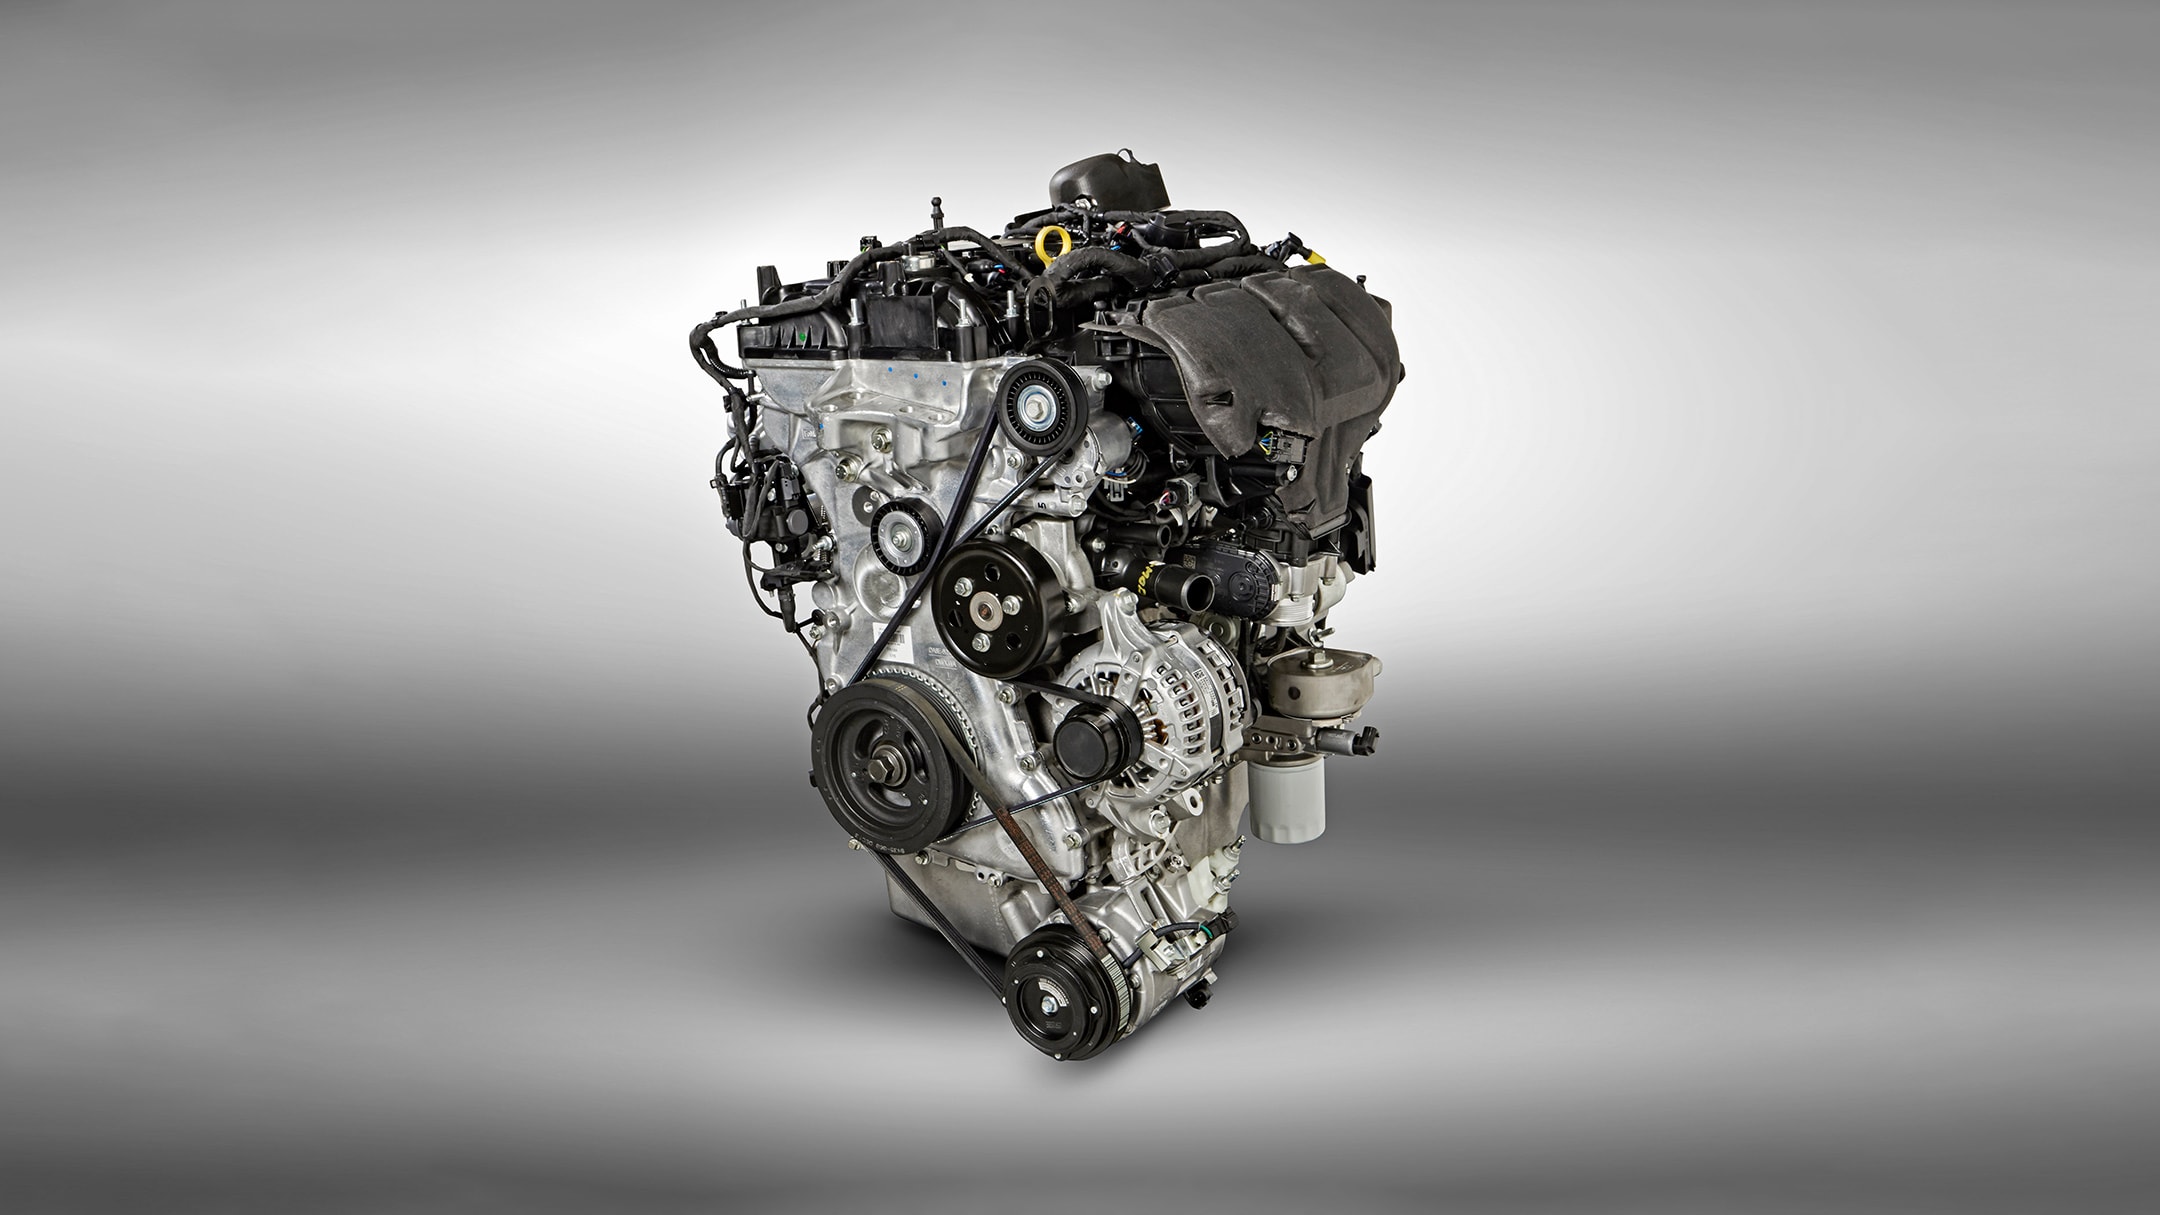 Powertrain – Engines and transmissions